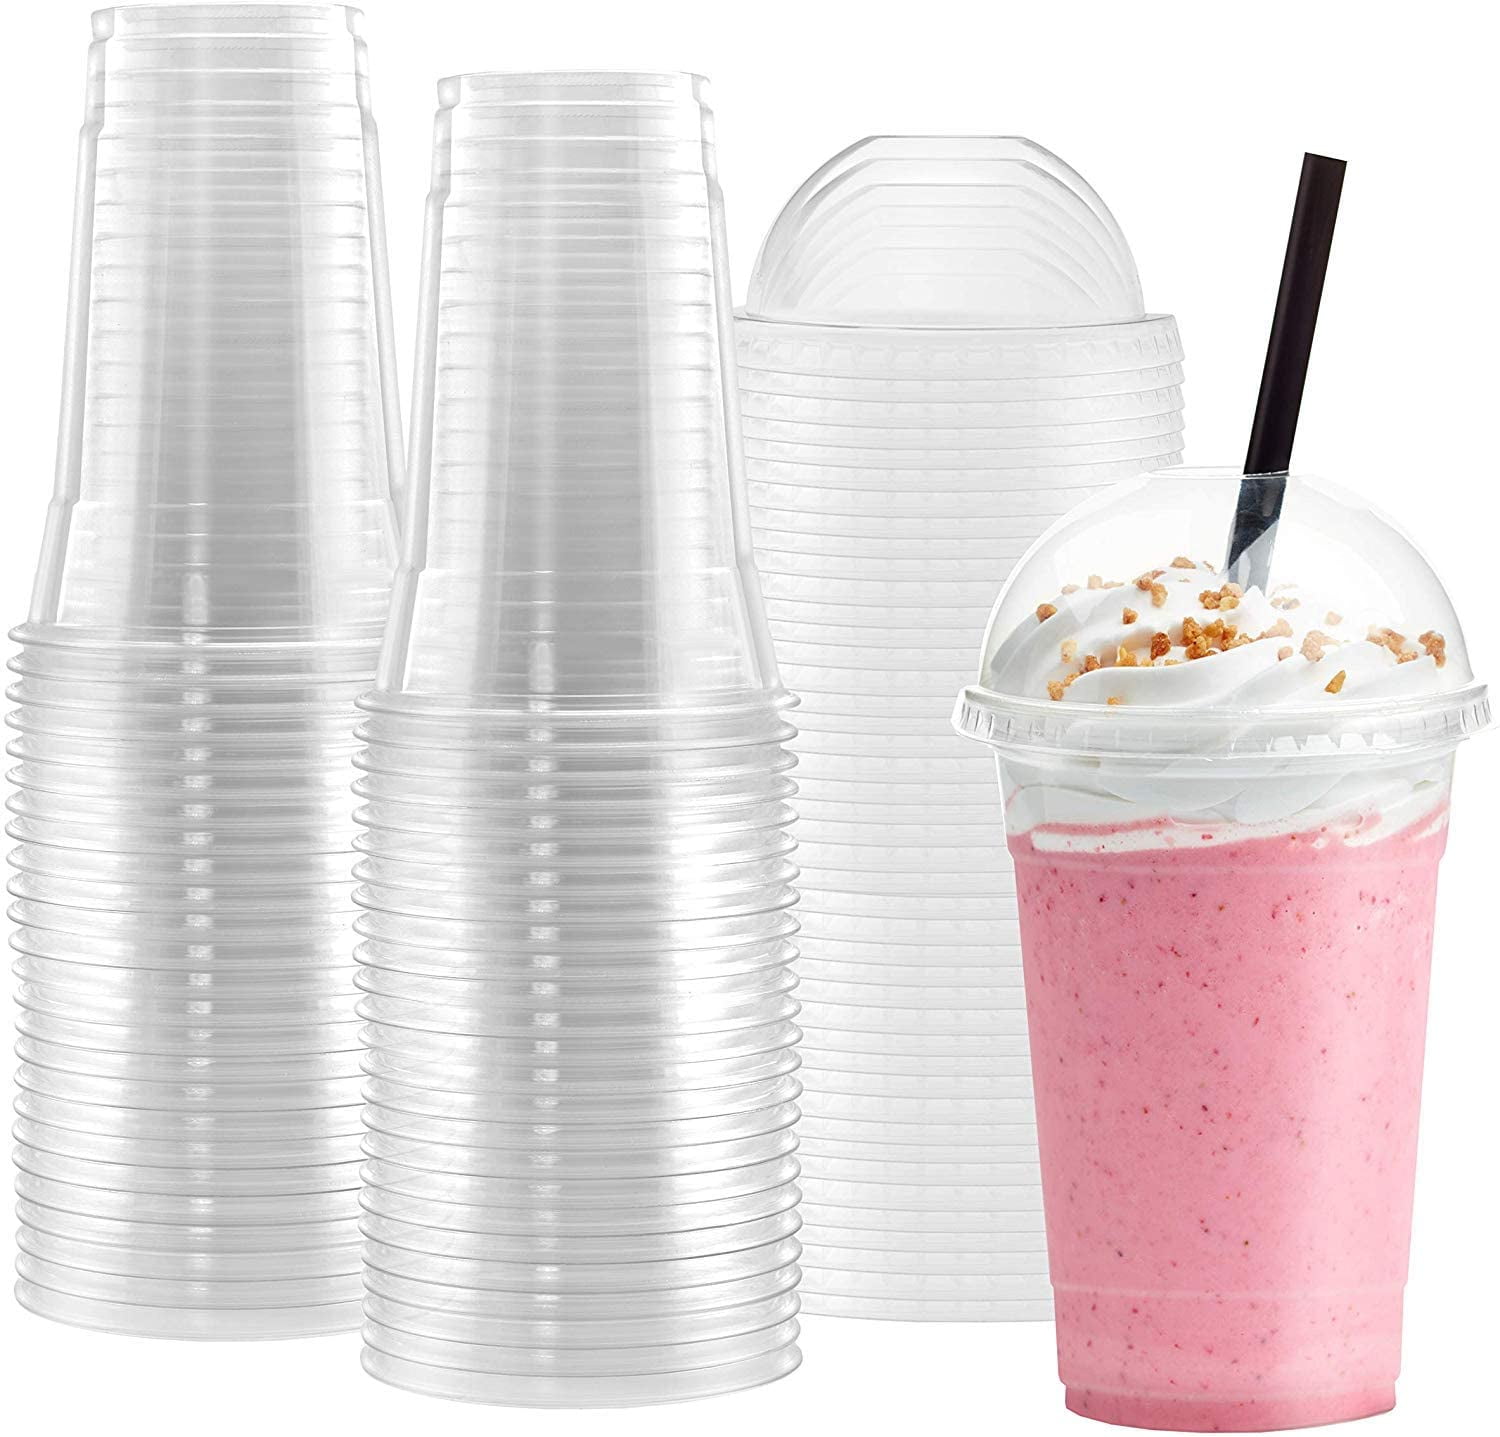 16 oz Smoothie Tumblers with Dome Lids Set of 100 50 Cups 50 Lids 